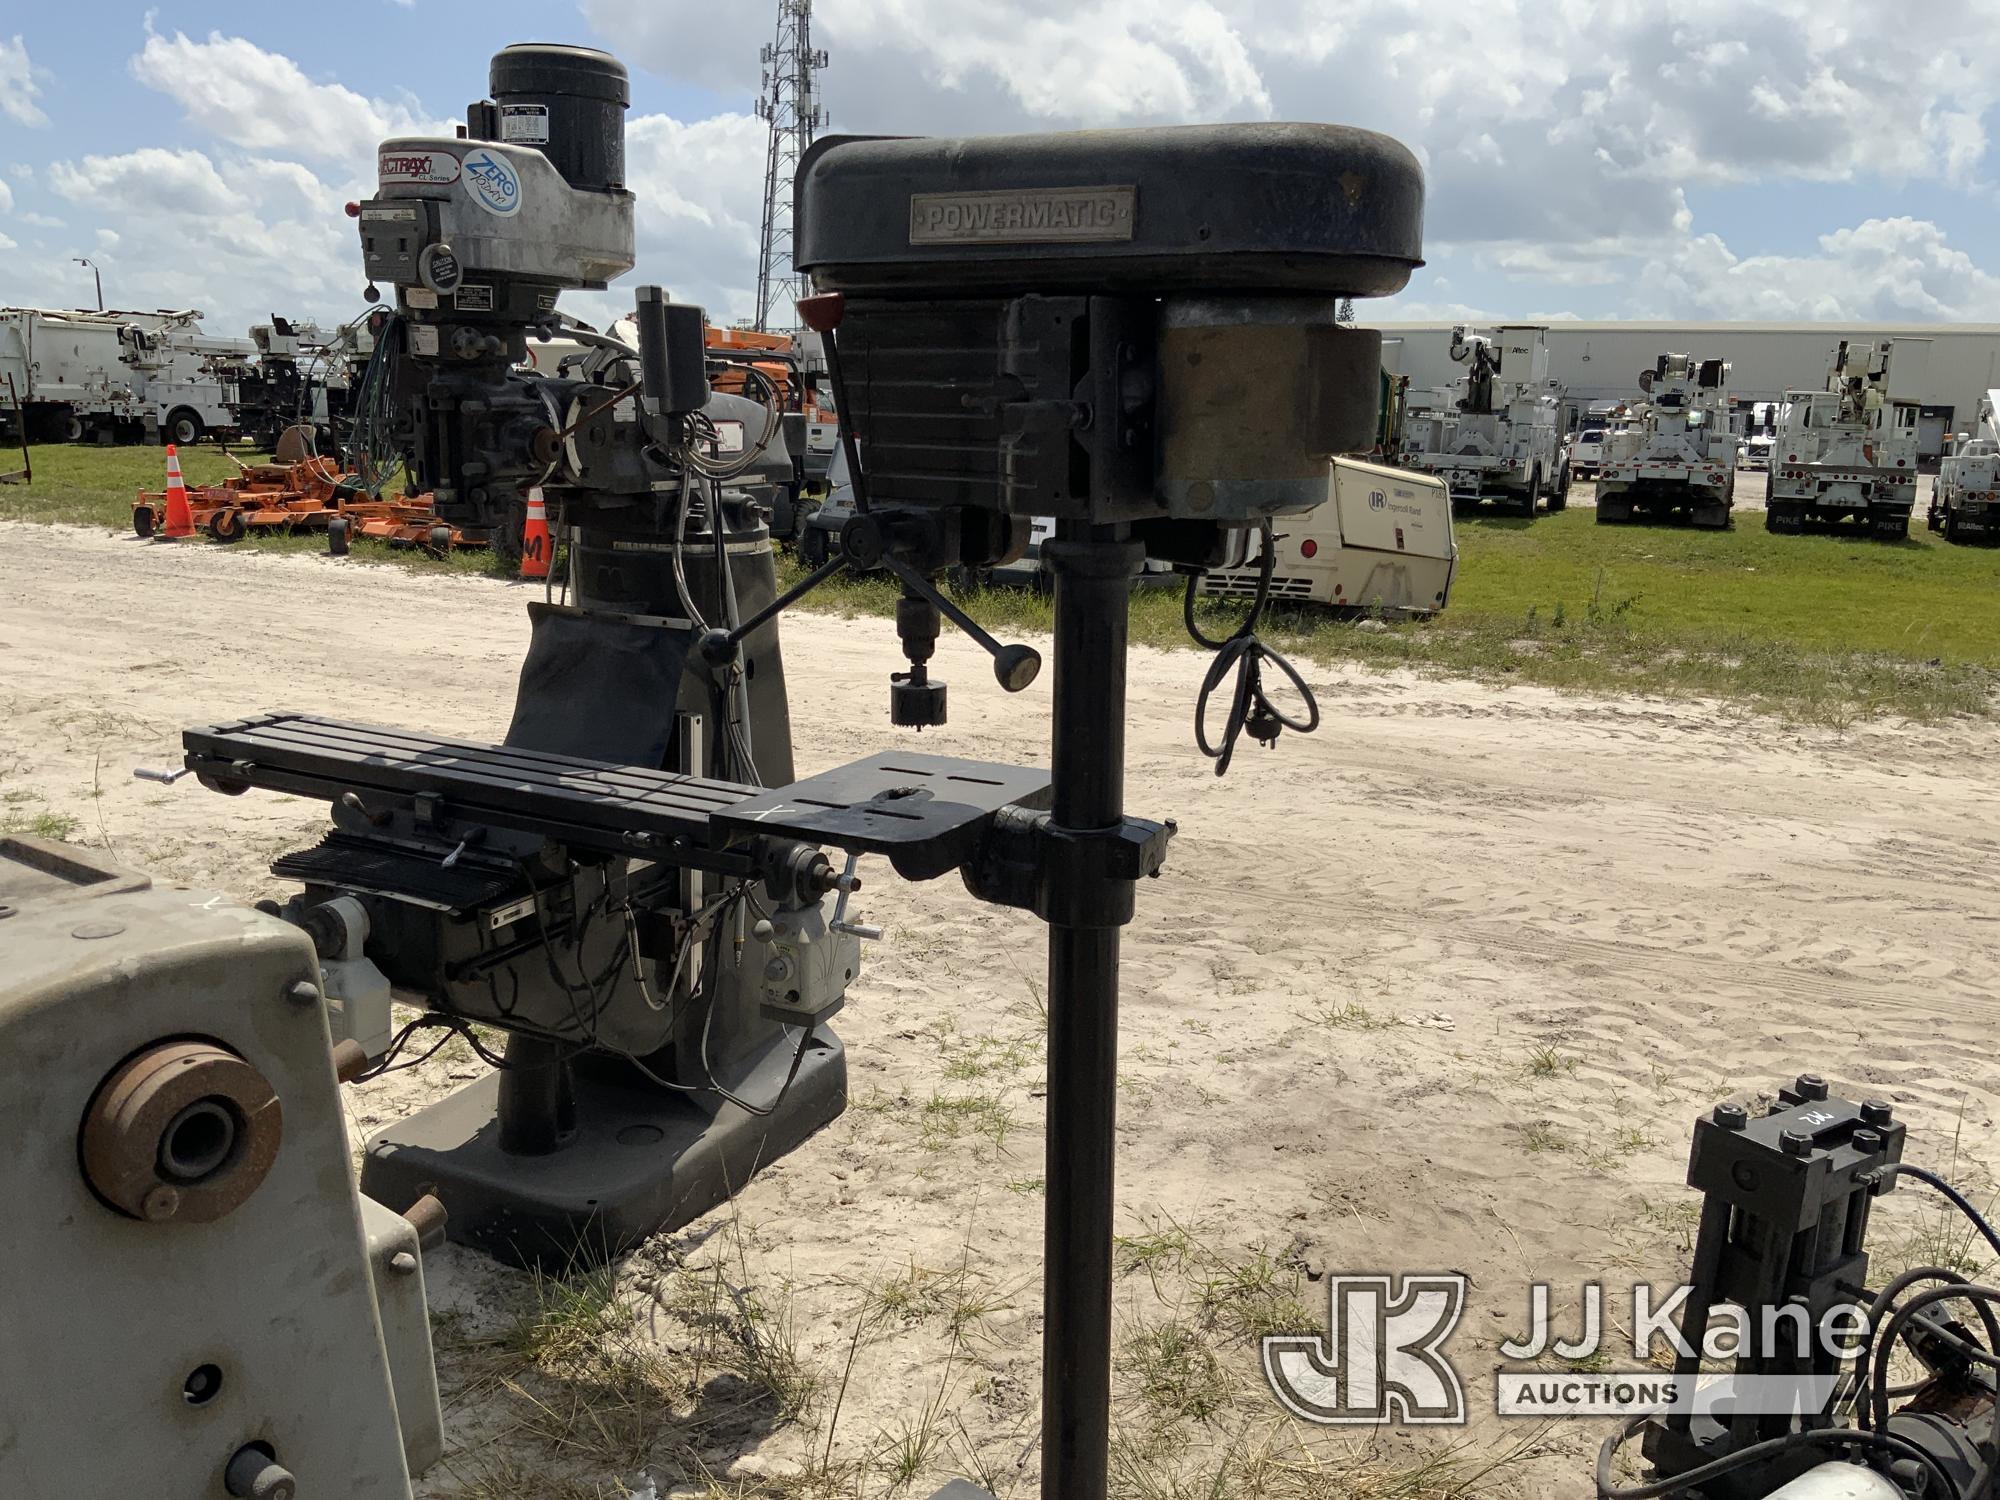 (Westlake, FL) Power Matic Drill Press (Condition Unknown) NOTE: This unit is being sold AS IS/WHERE